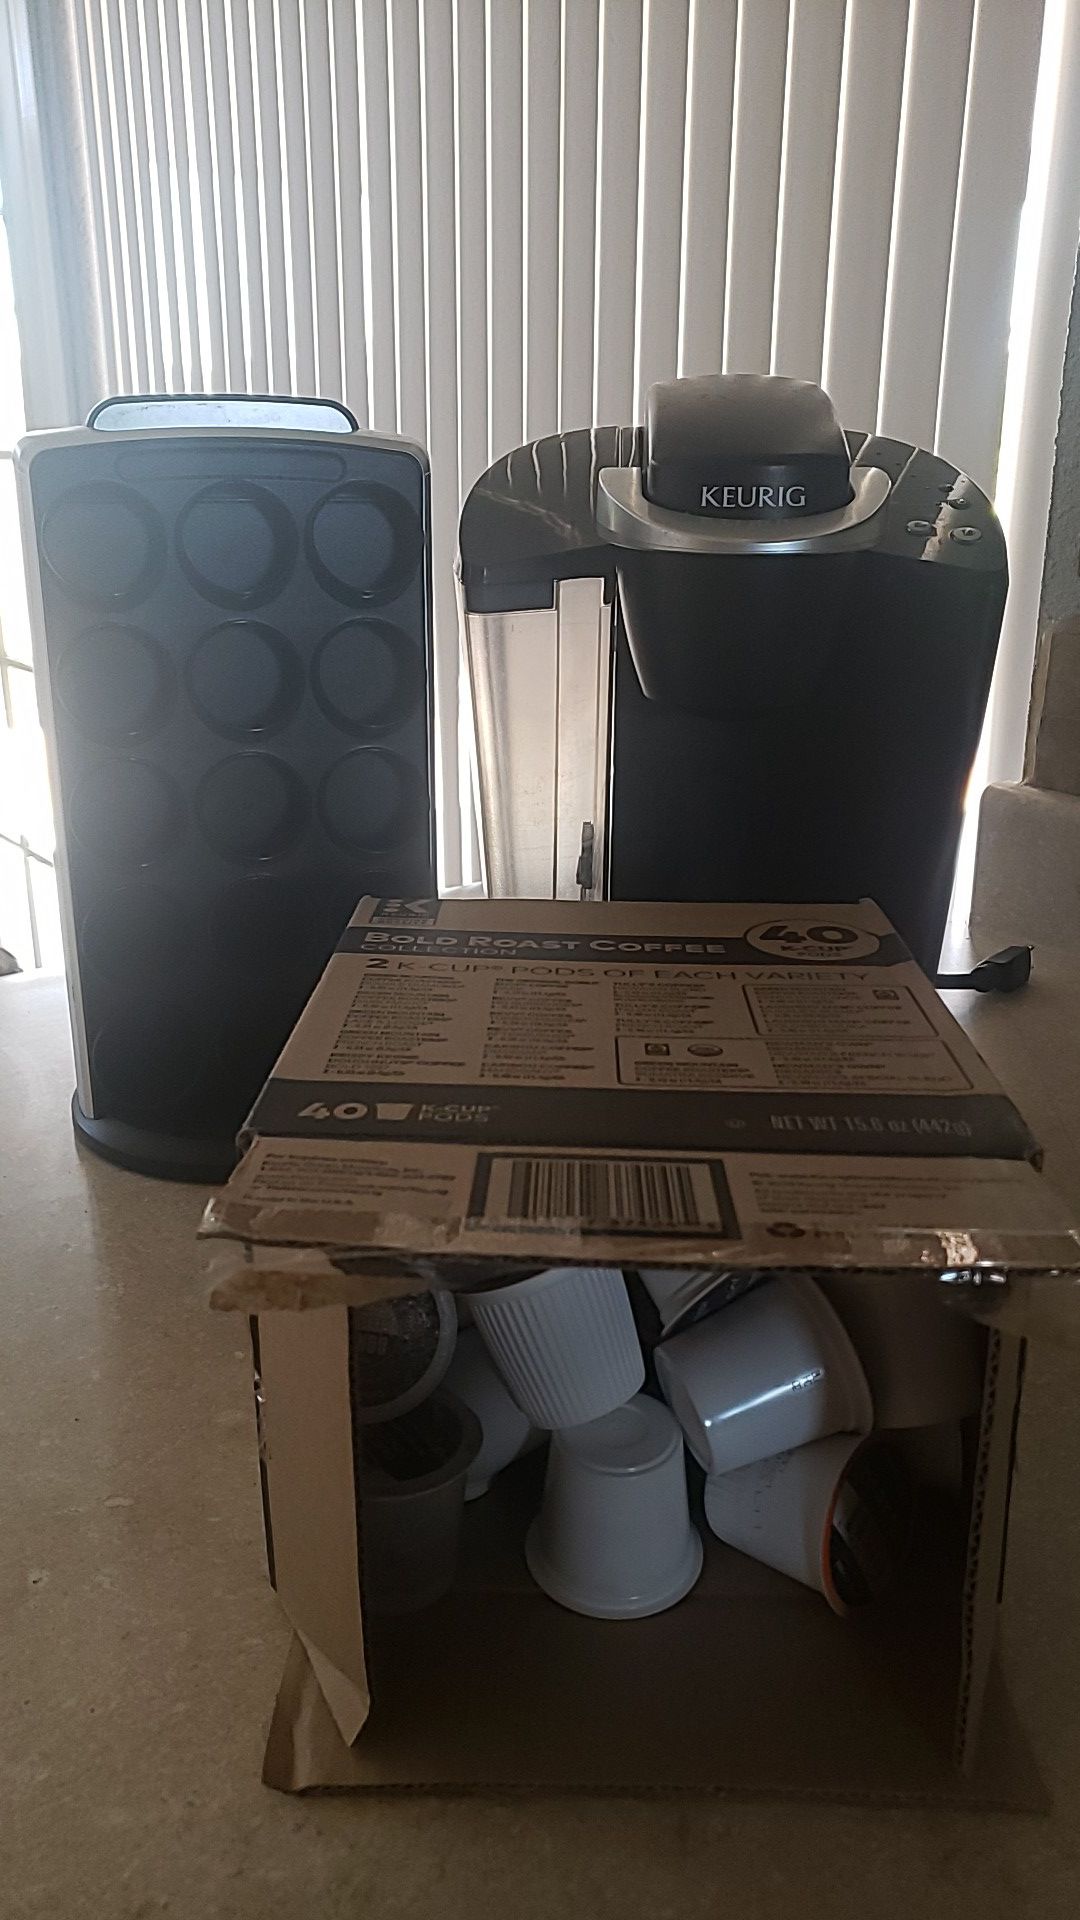 Keurig for sale $55 obo..comes with 44 dark roast kcups and matching kcup holder